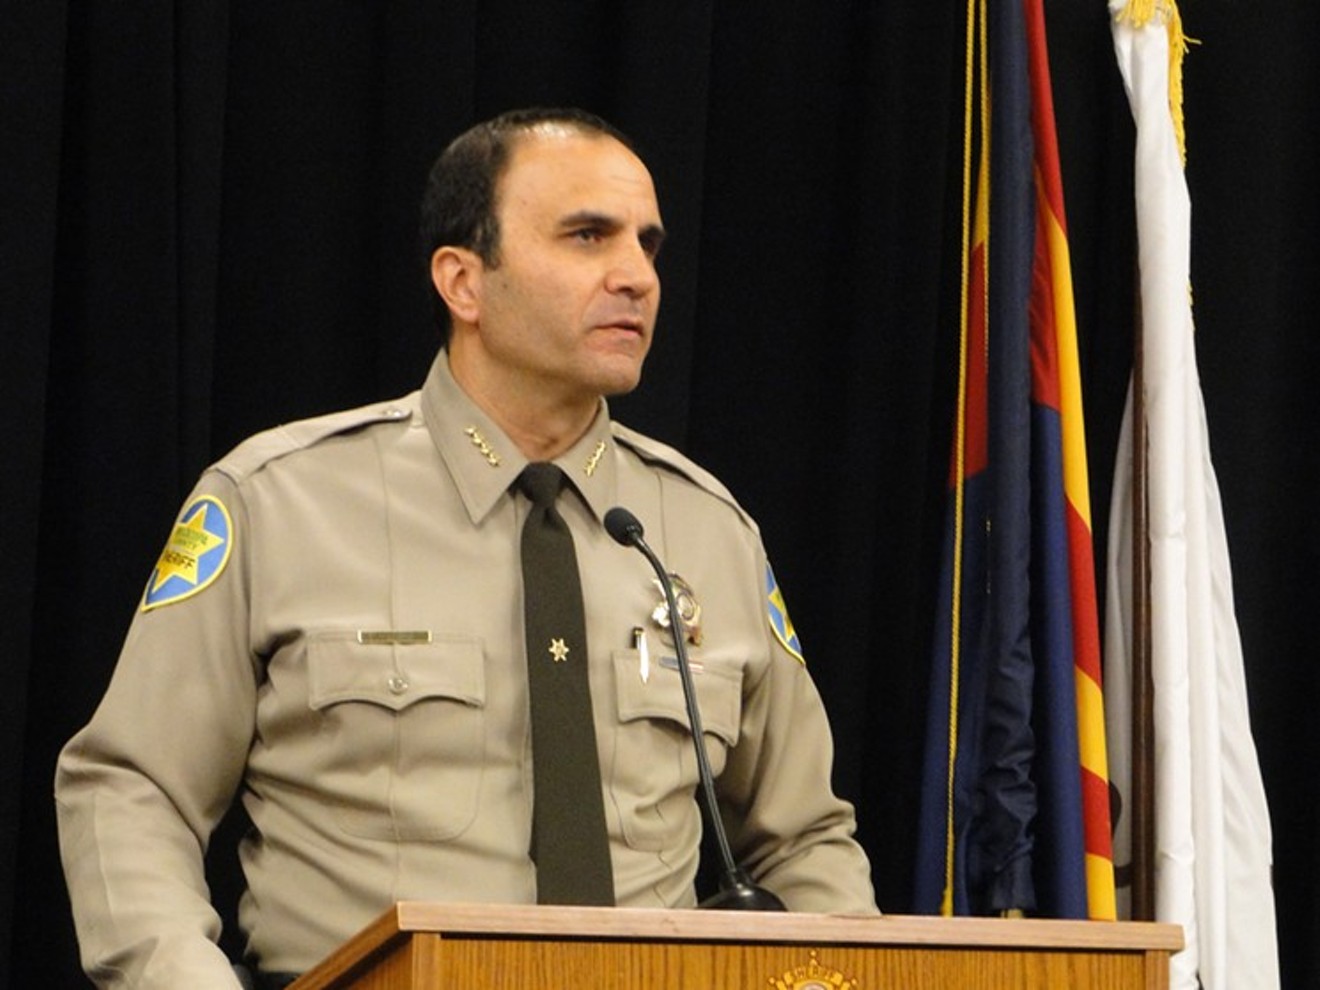 Maricopa County Sheriff Paul Penzone has tried to distance himself from former Sheriff Joe Arpaio but faces a contempt of court citation over a lawsuit that started under his predecessor.